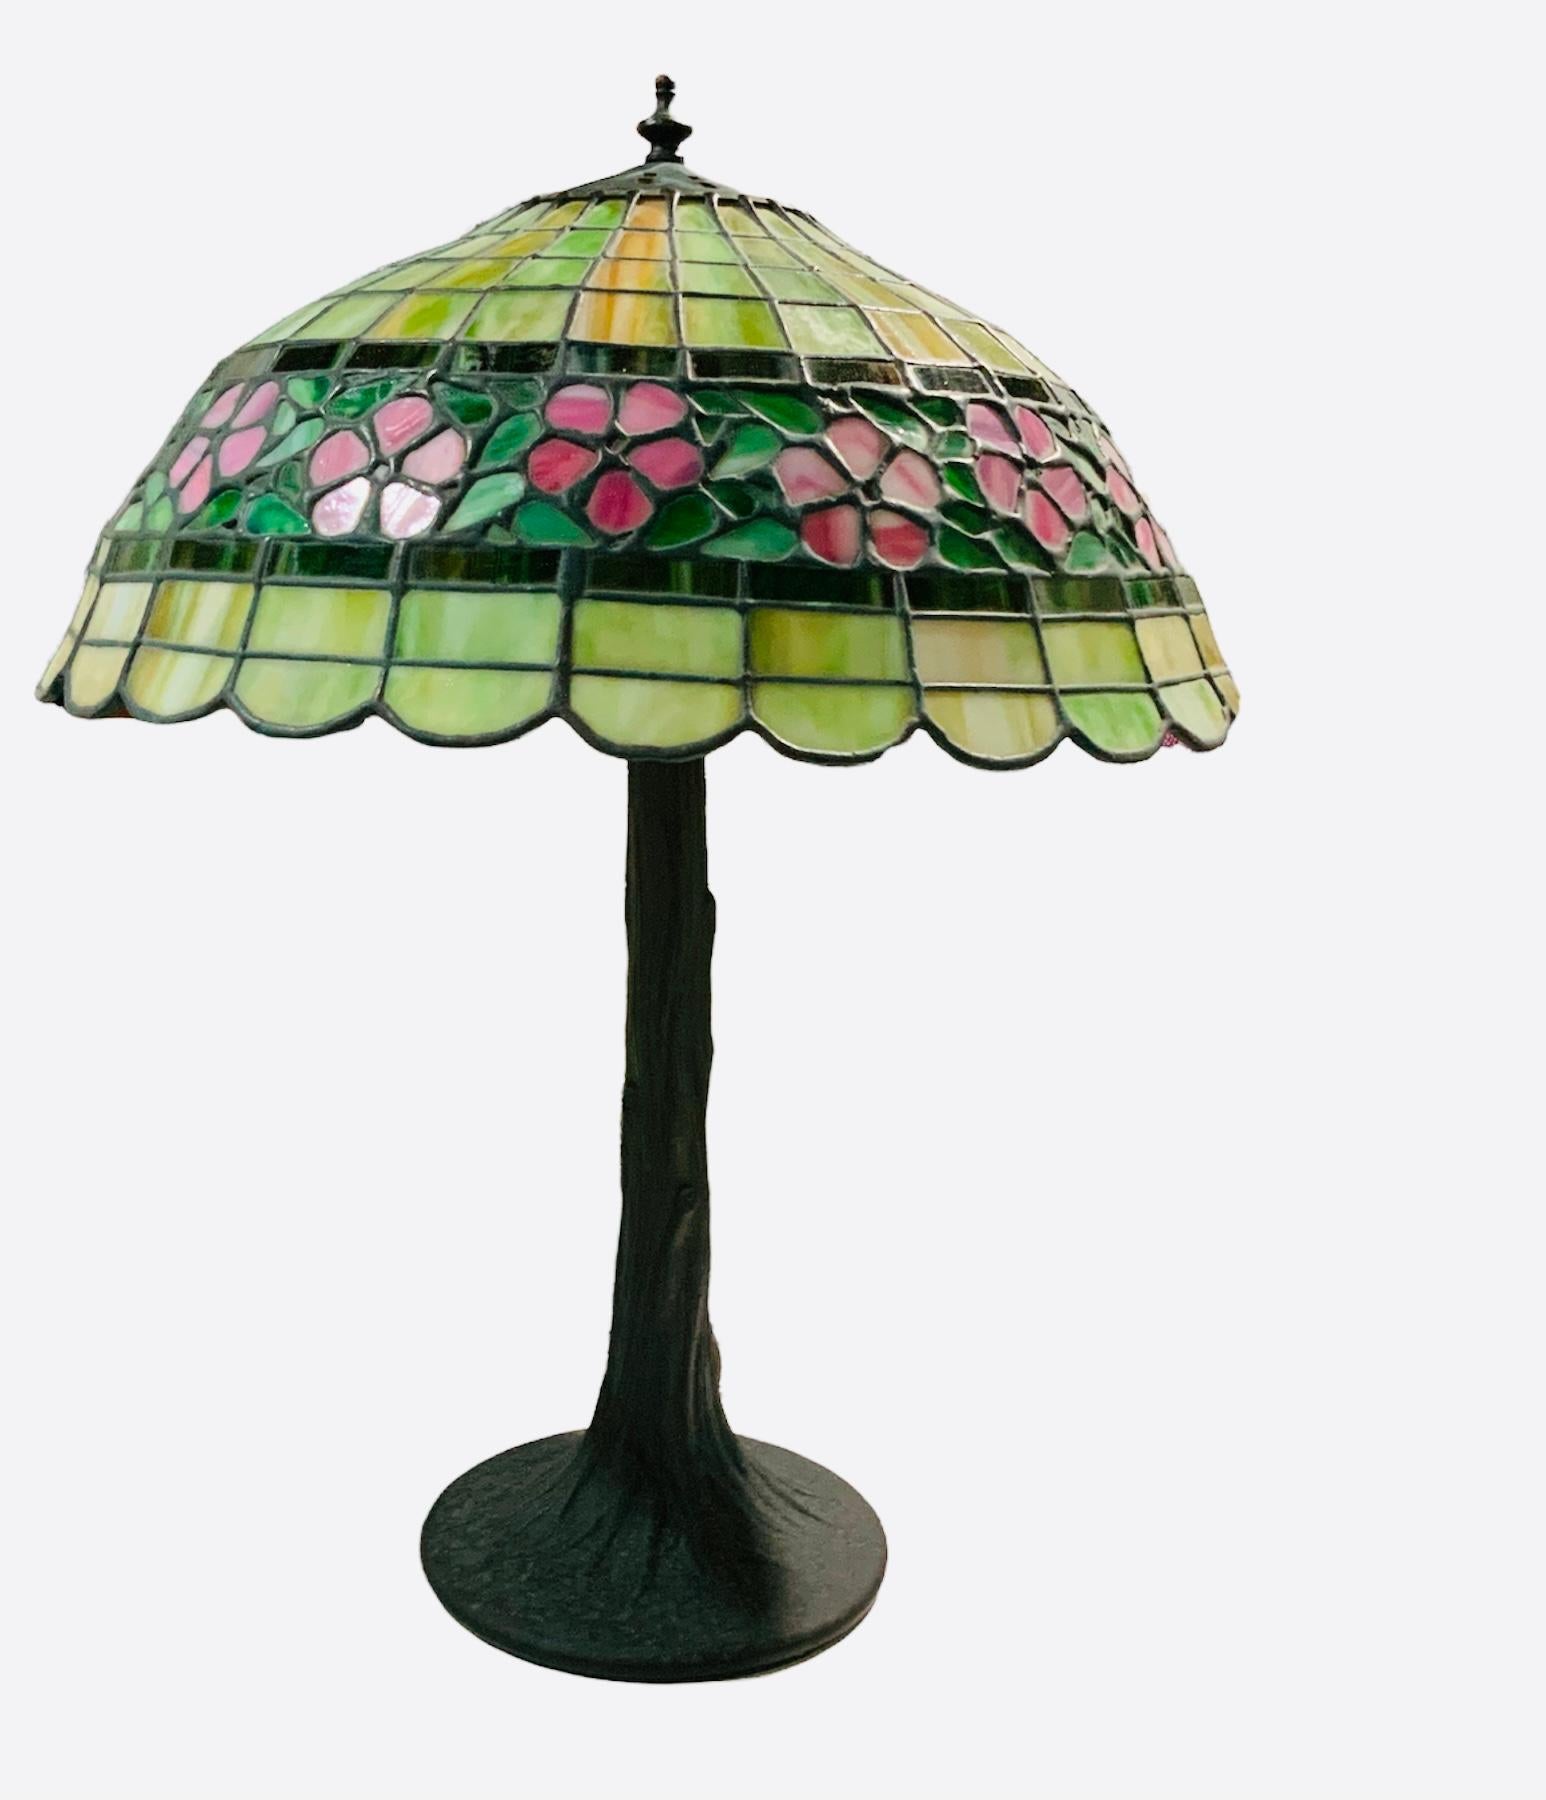 American Classical Tiffany & Co. Style Table Lamp With Impatient Walleriana Flowers Design